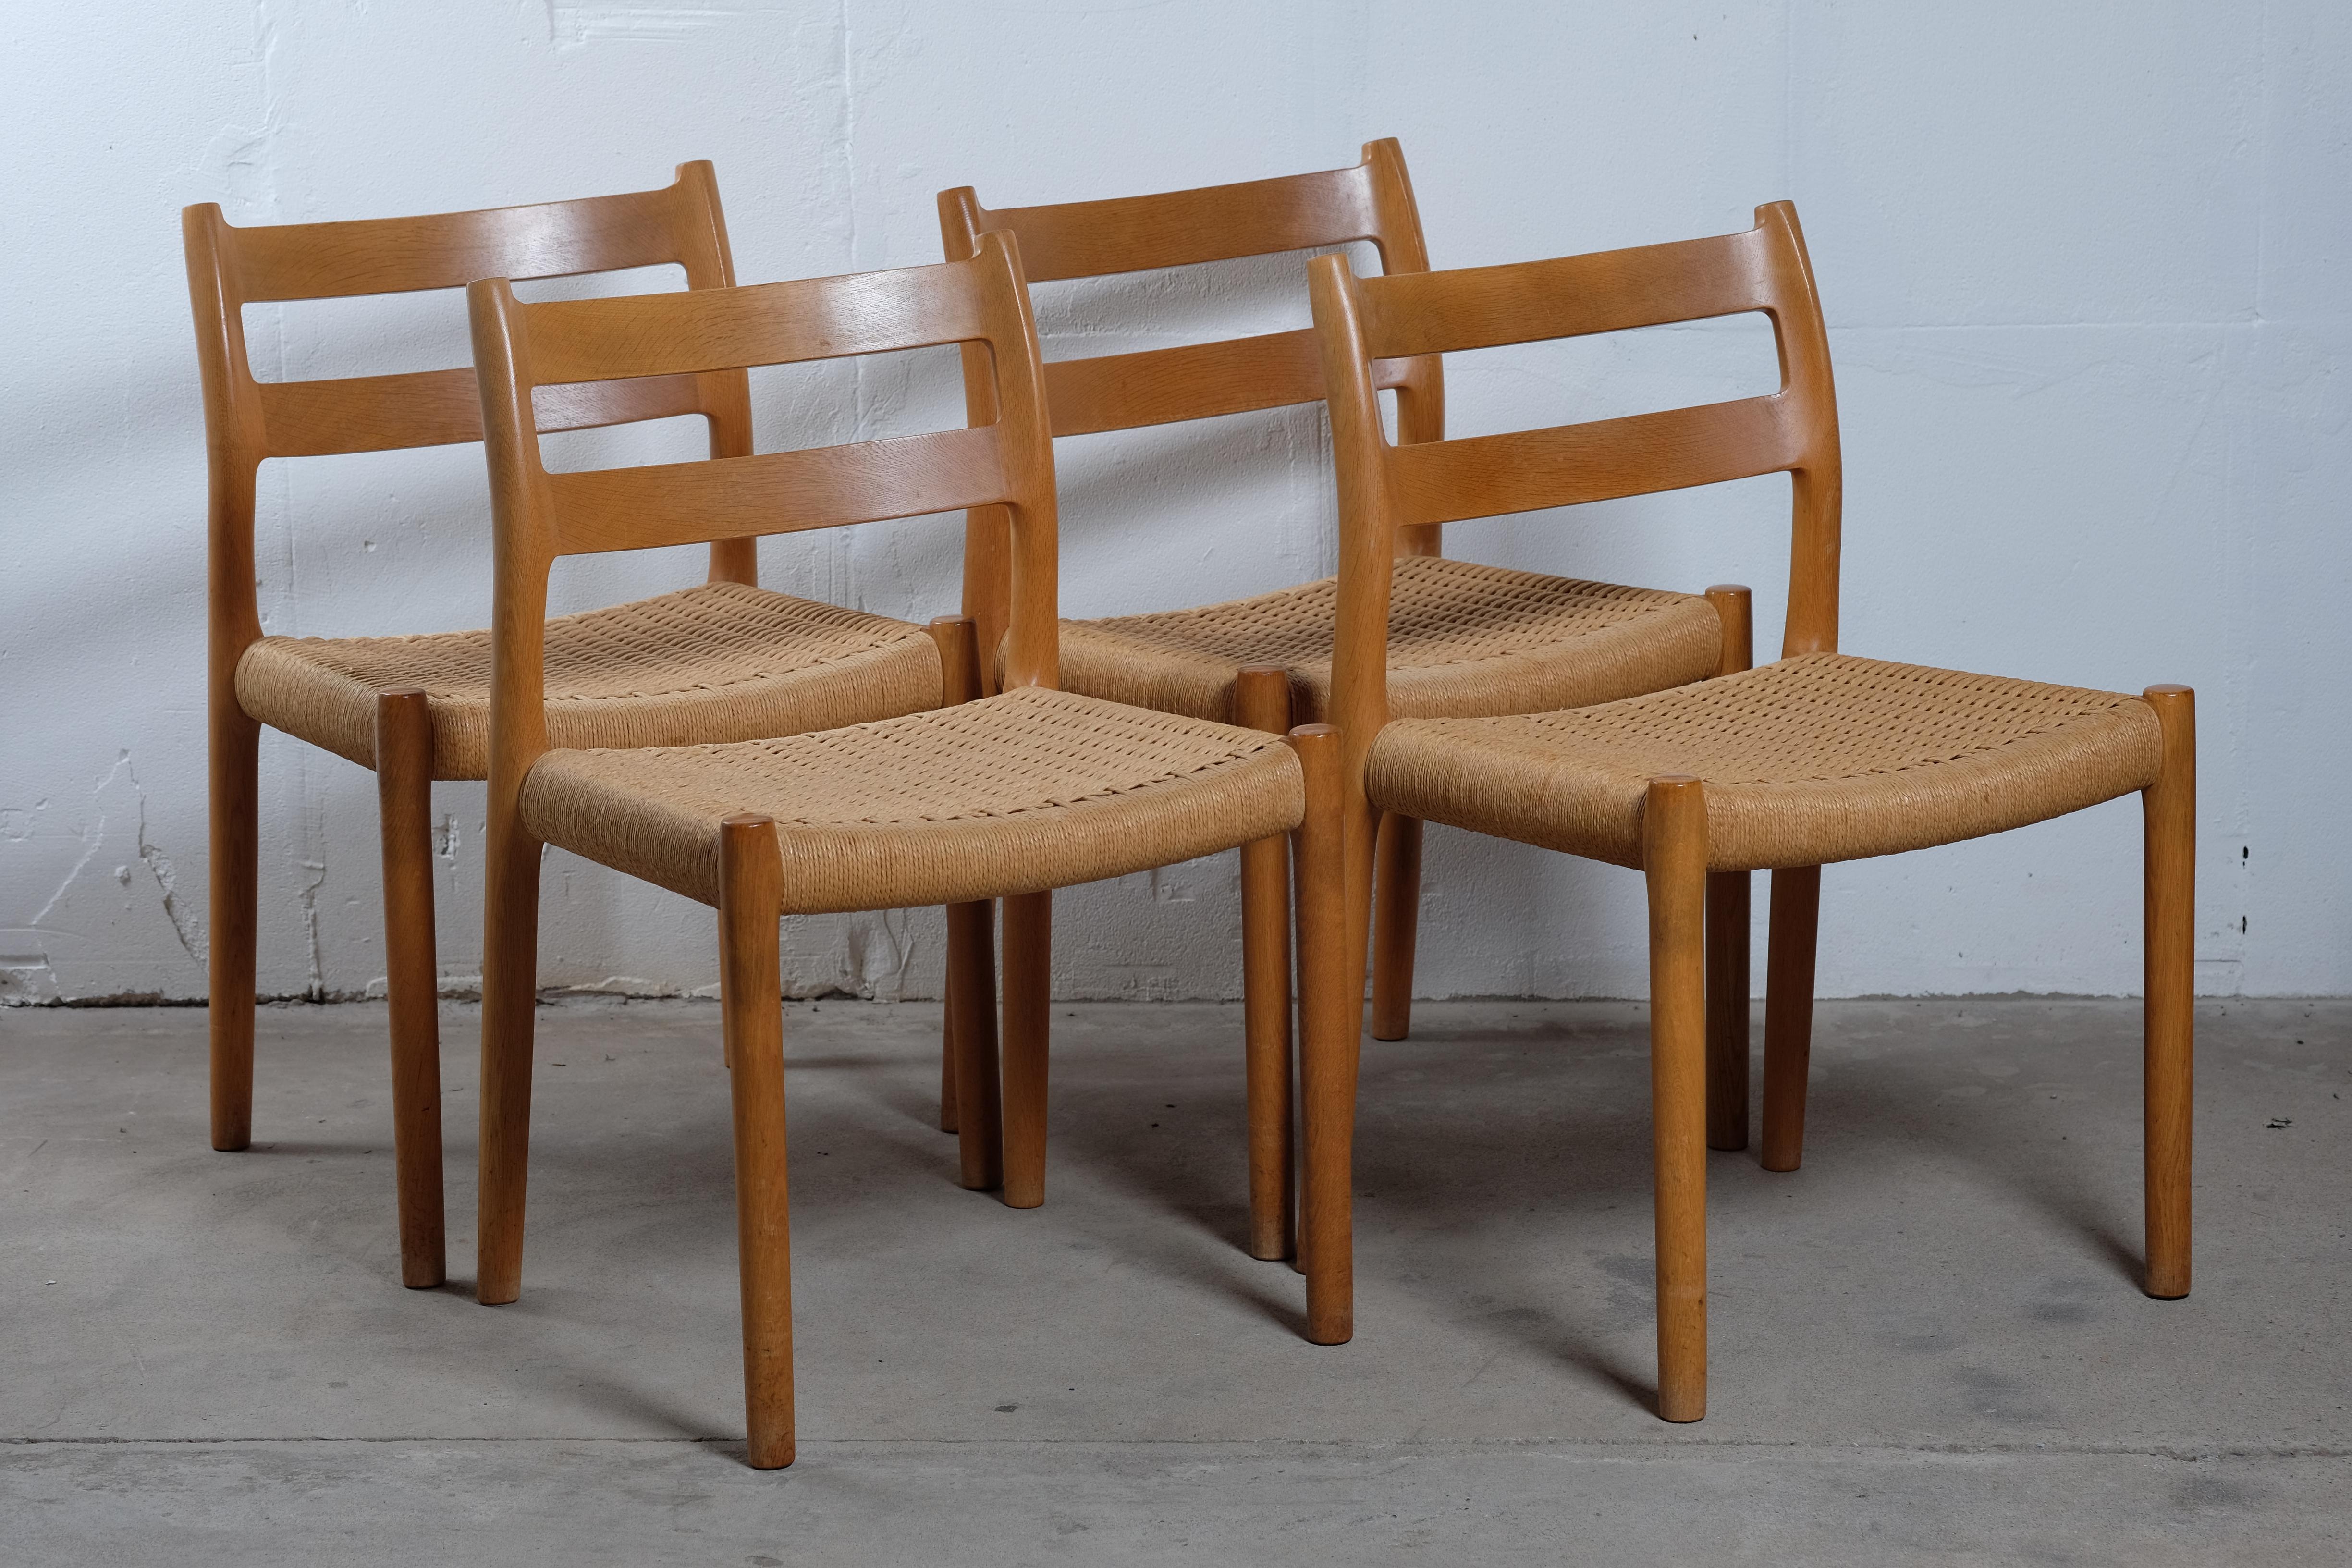 Set of four N.O. Møller  for J.L. Møller Dining chairs in Oak Model No.84 with paper cord seats. Great chair with a lot of comfort and outstanding quality that goes hand in hand with the beautiful design. The chairs and the paper cord seats are in